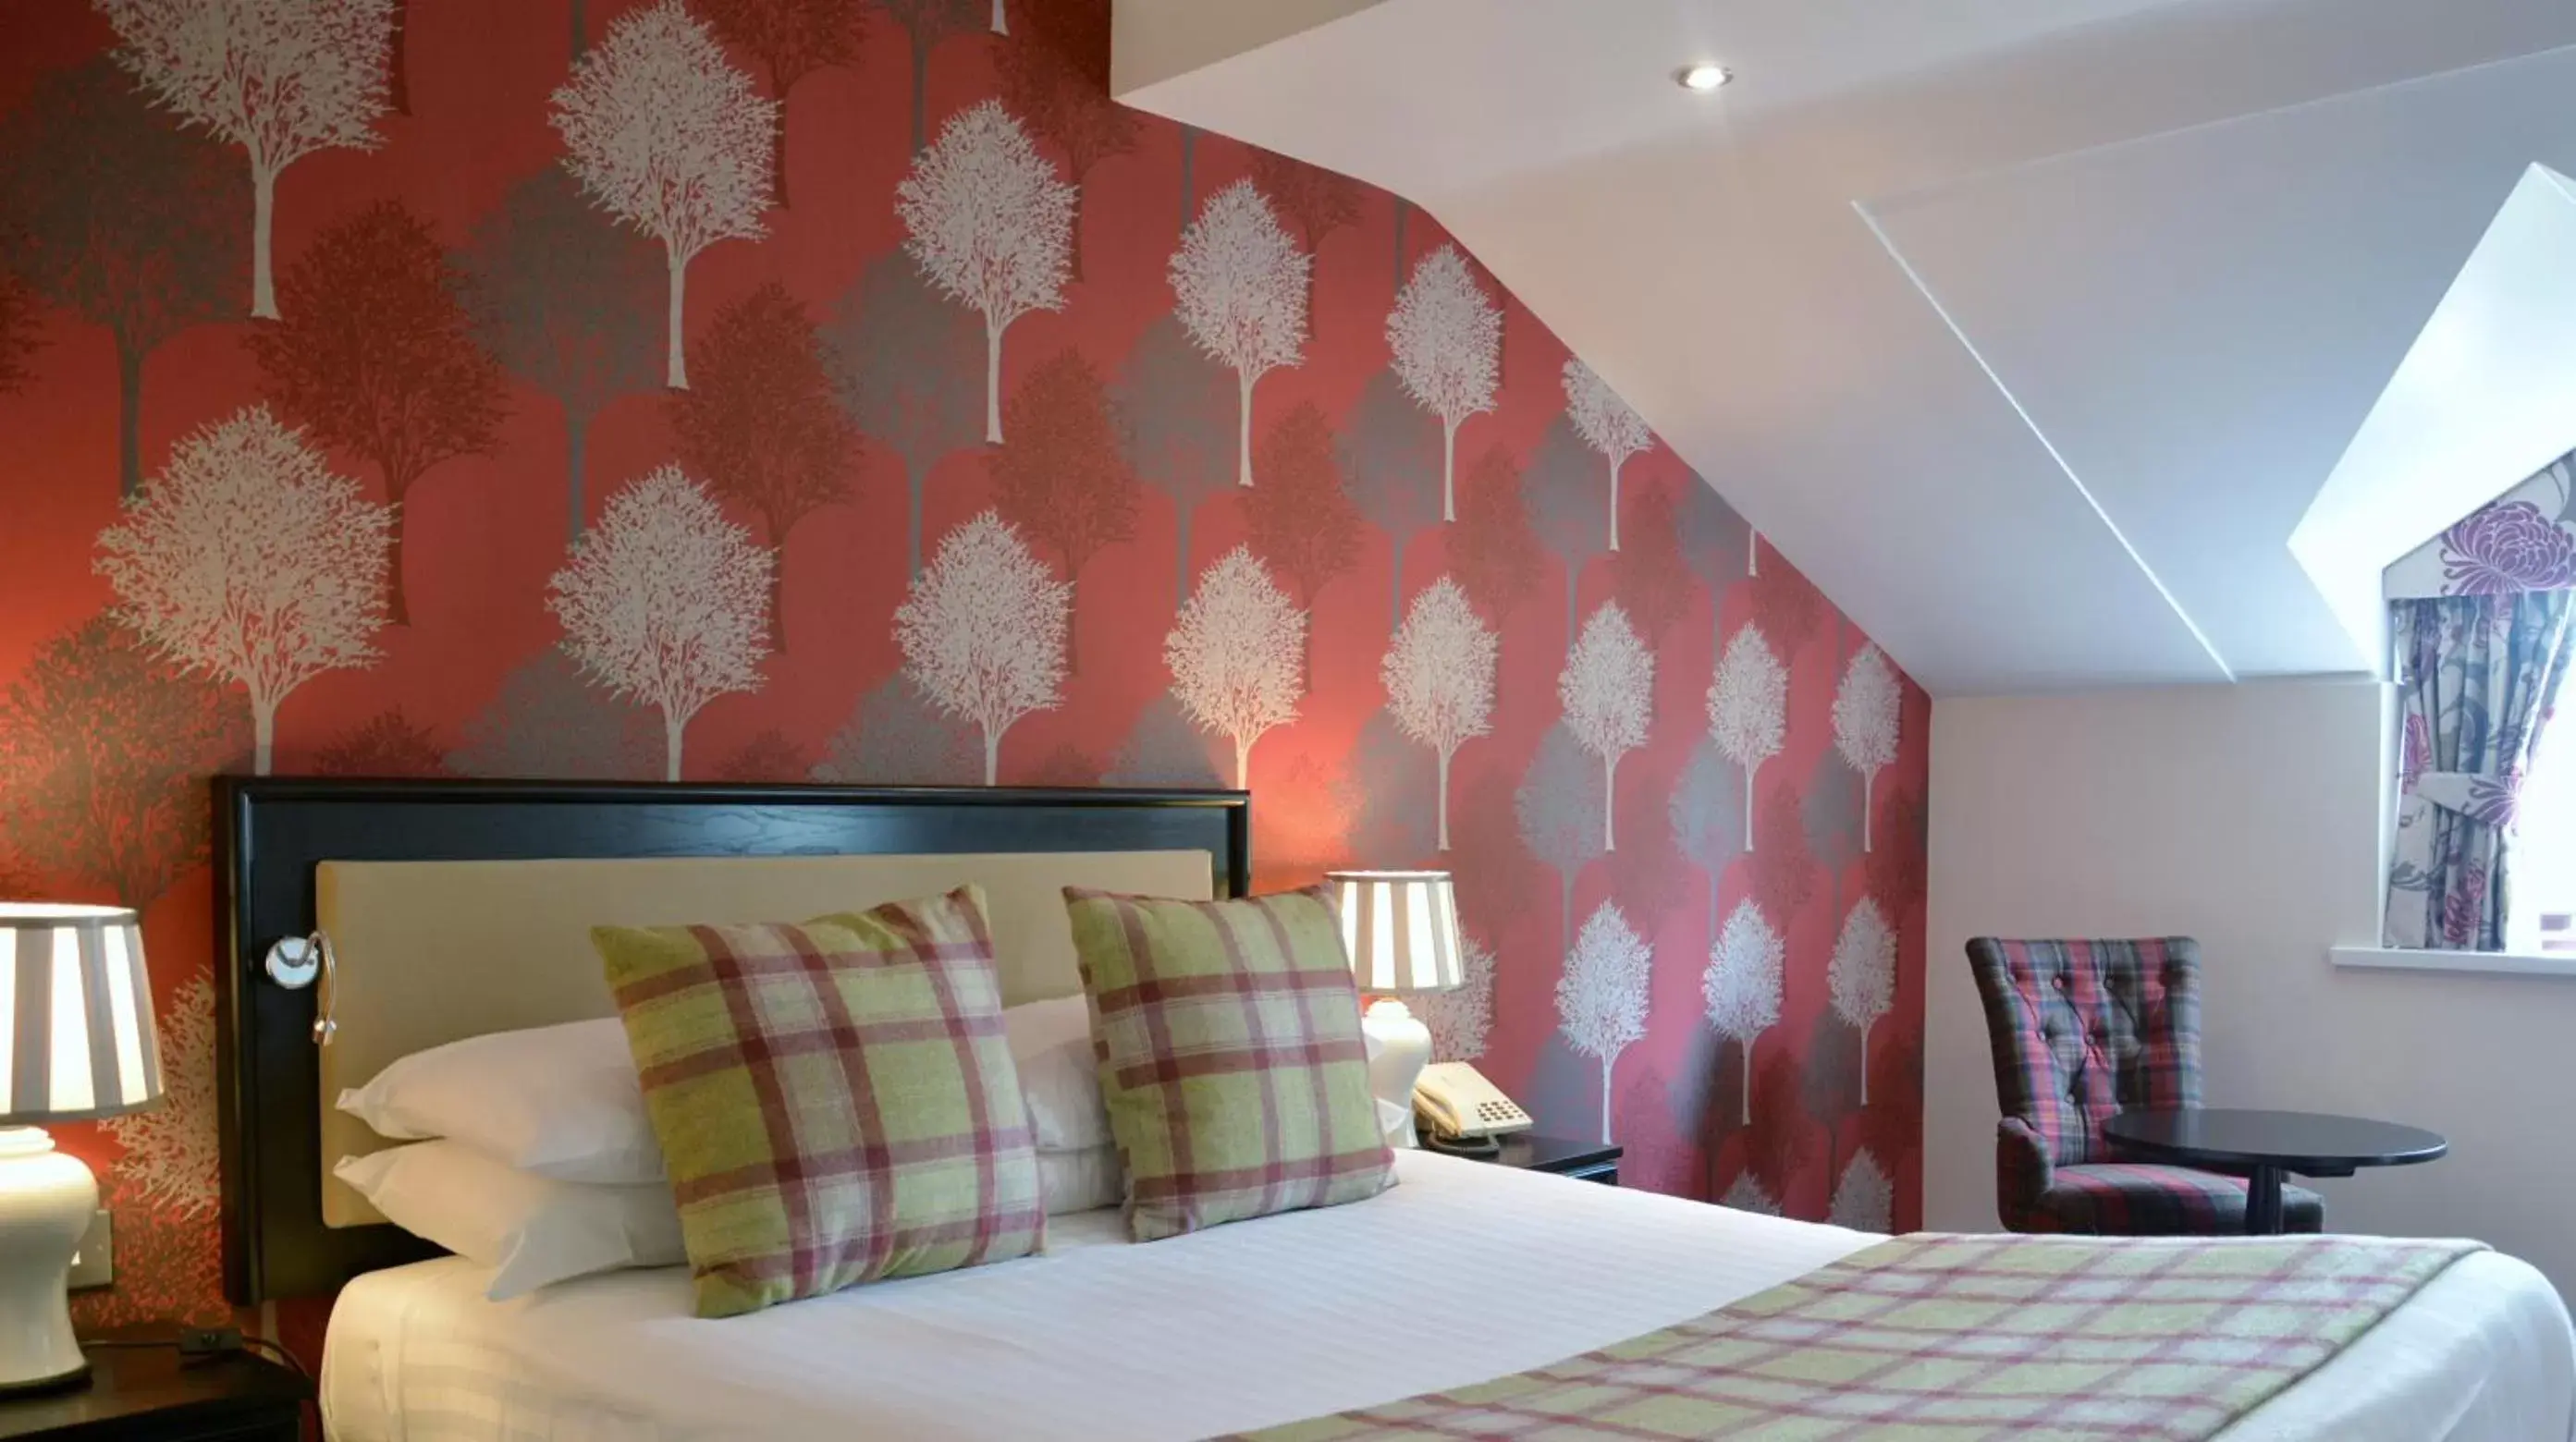 Bedroom, Bed in Stone House Hotel ‘A Bespoke Hotel’